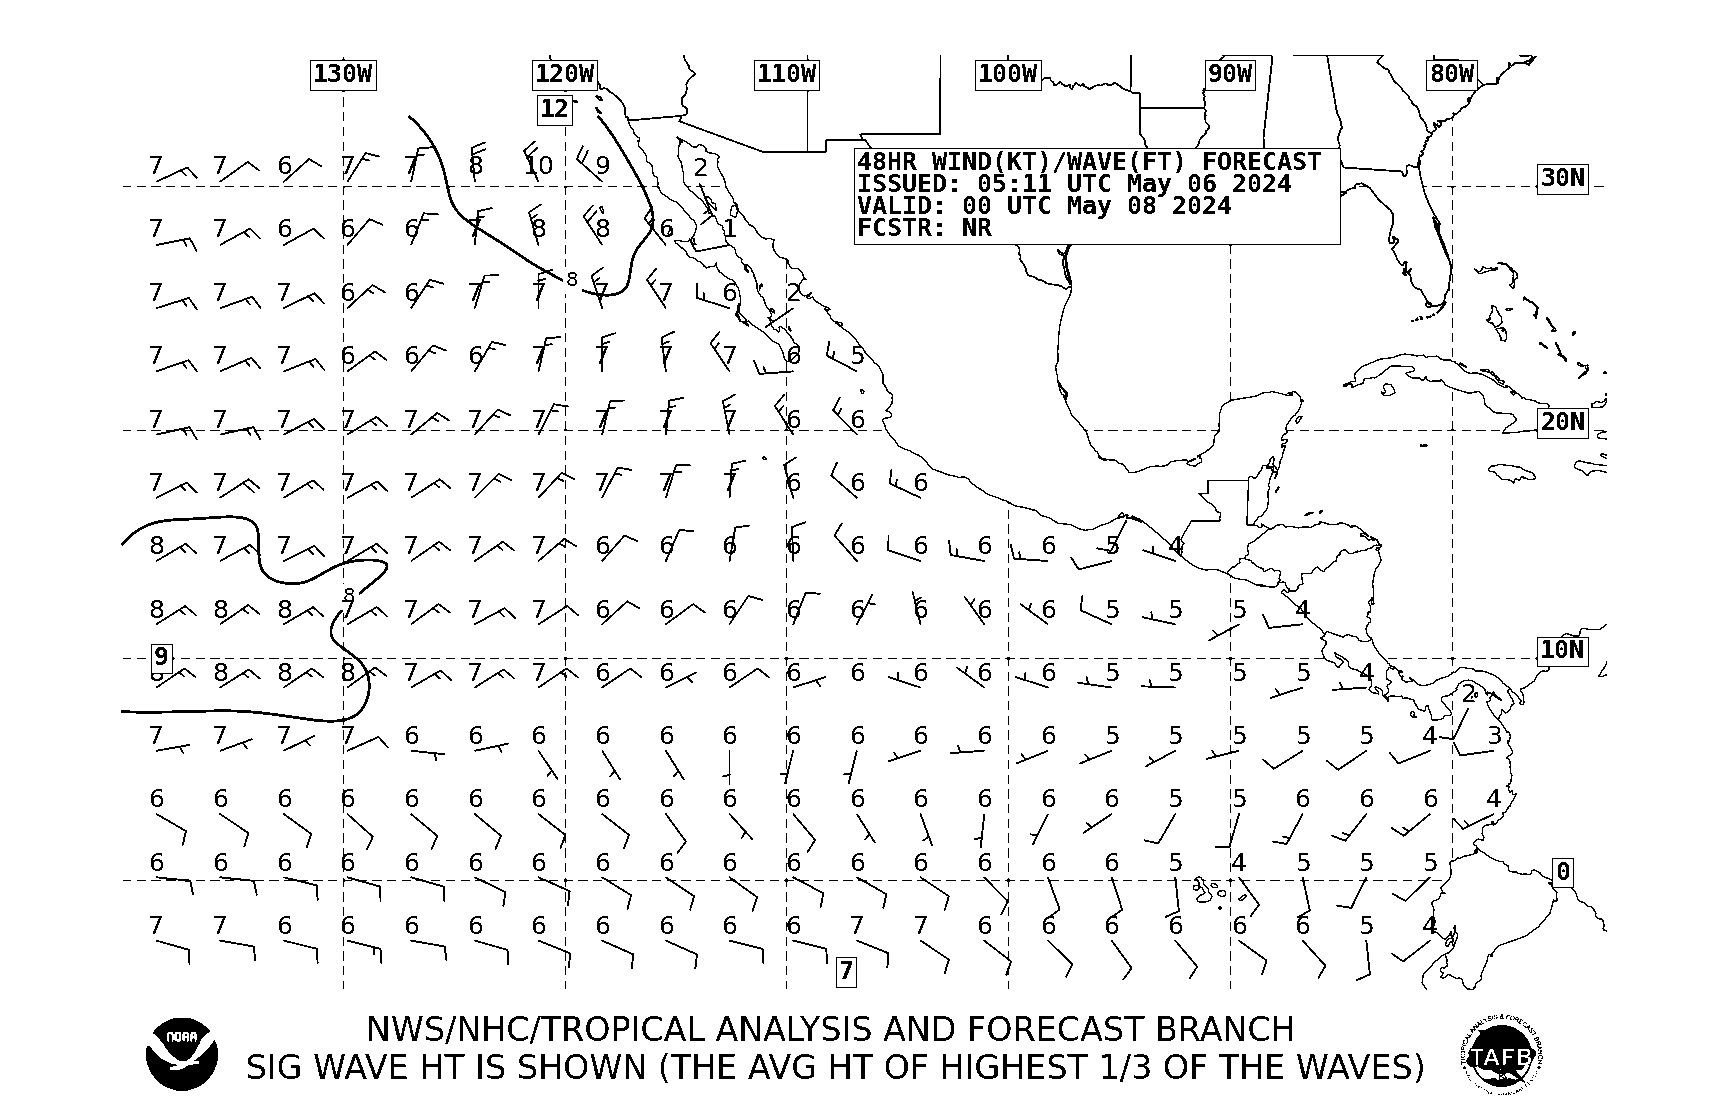 48 hour SE Pacific wind/wave